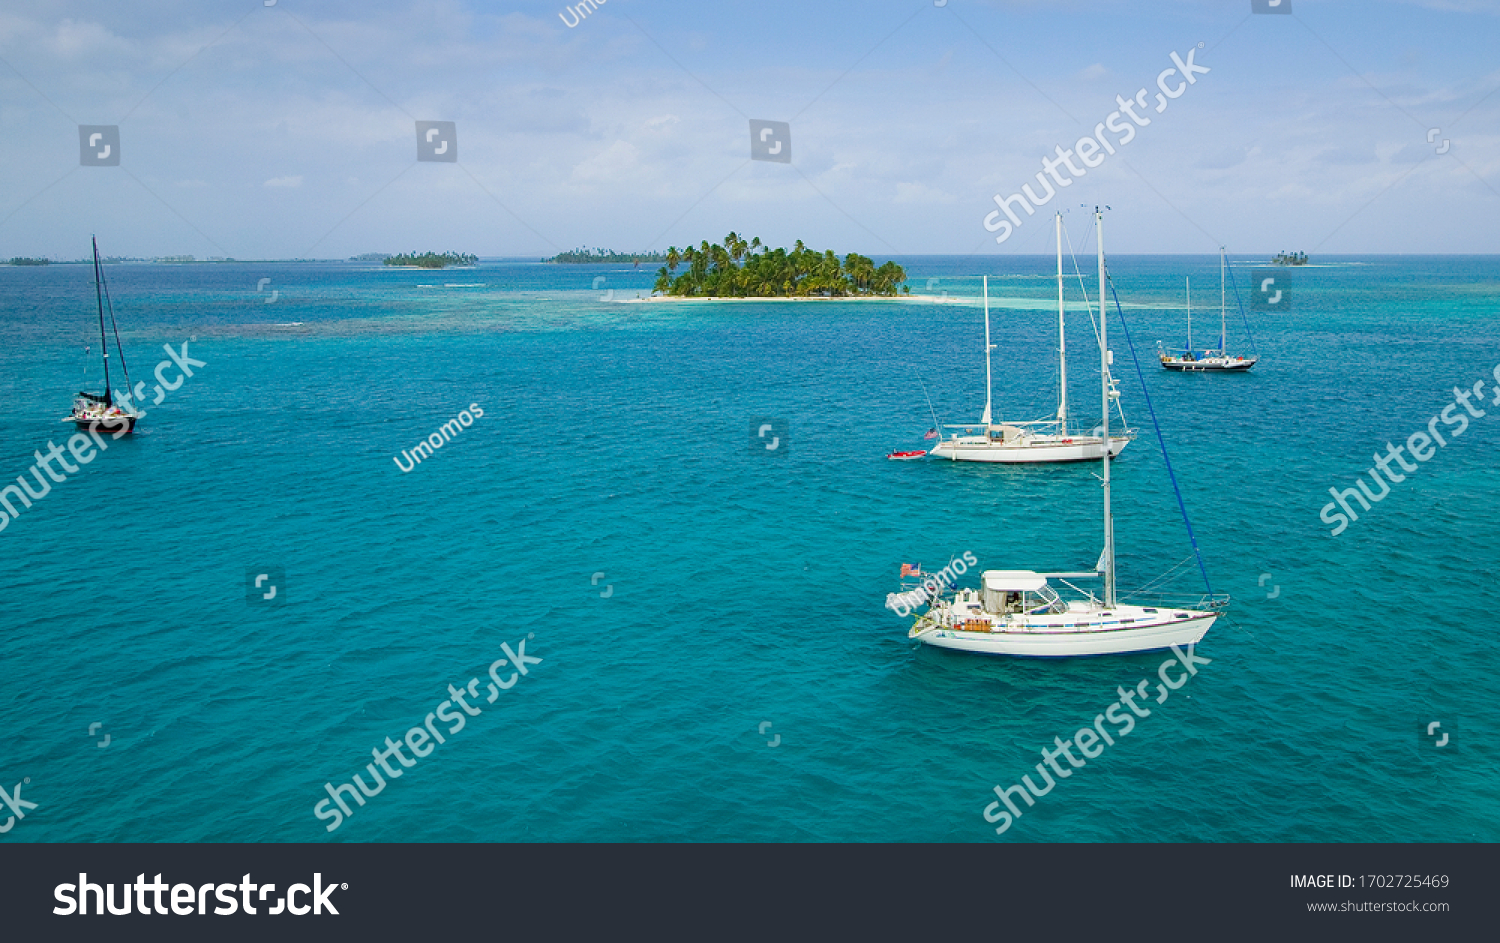 sailing yachts at anchor in the turquoise colored waters of the San Blas Islands, Kuna Yala, Panama #1702725469